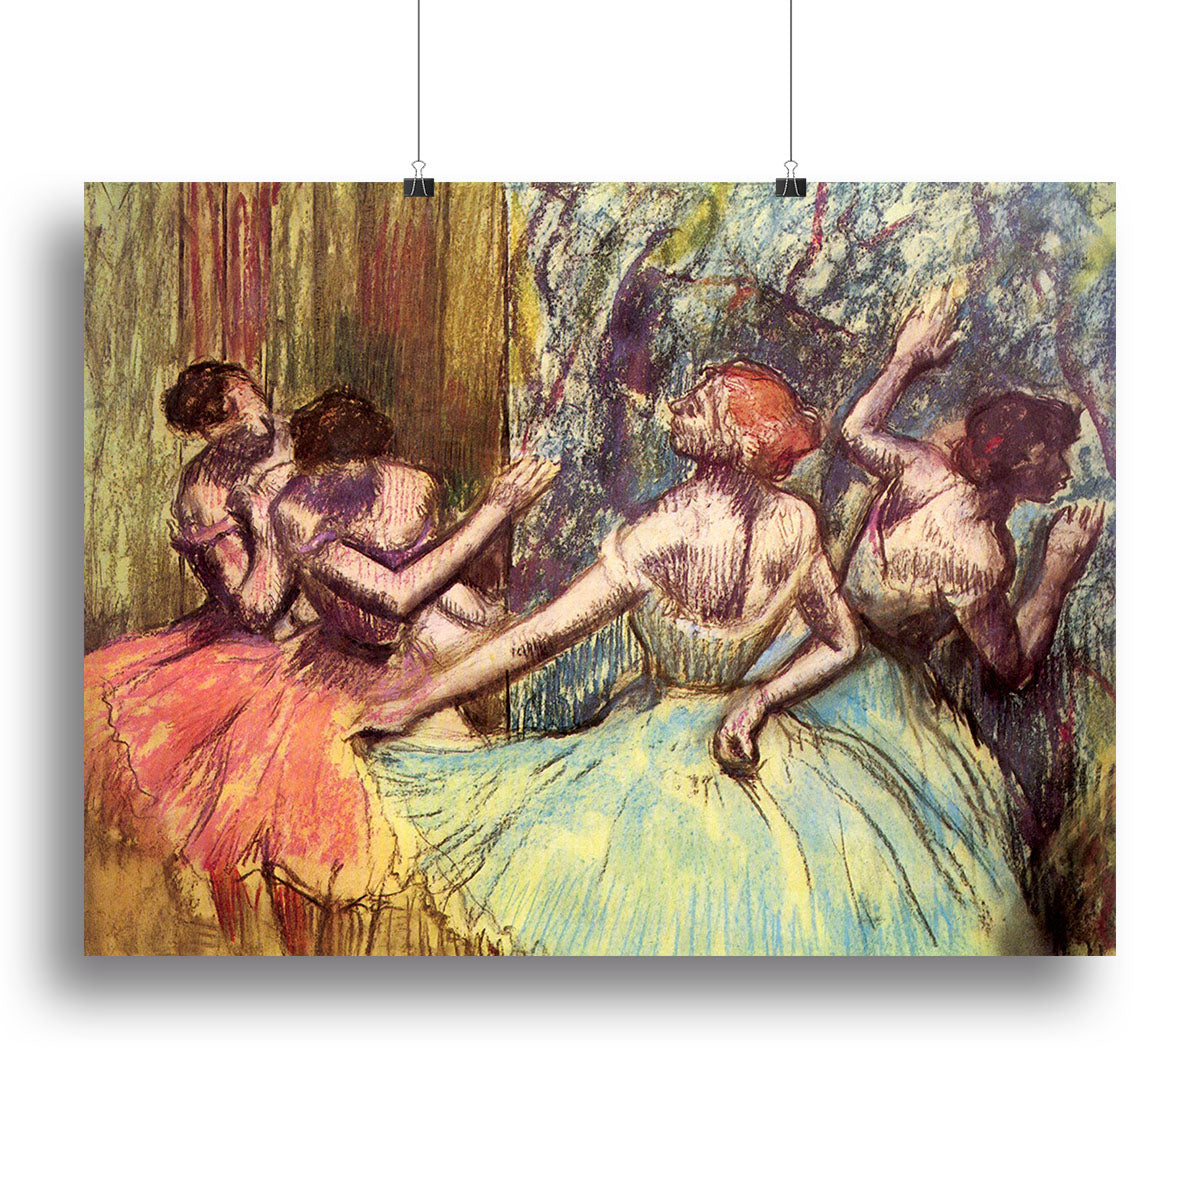 Four dancers behind the scenes 2 by Degas Canvas Print or Poster - Canvas Art Rocks - 2